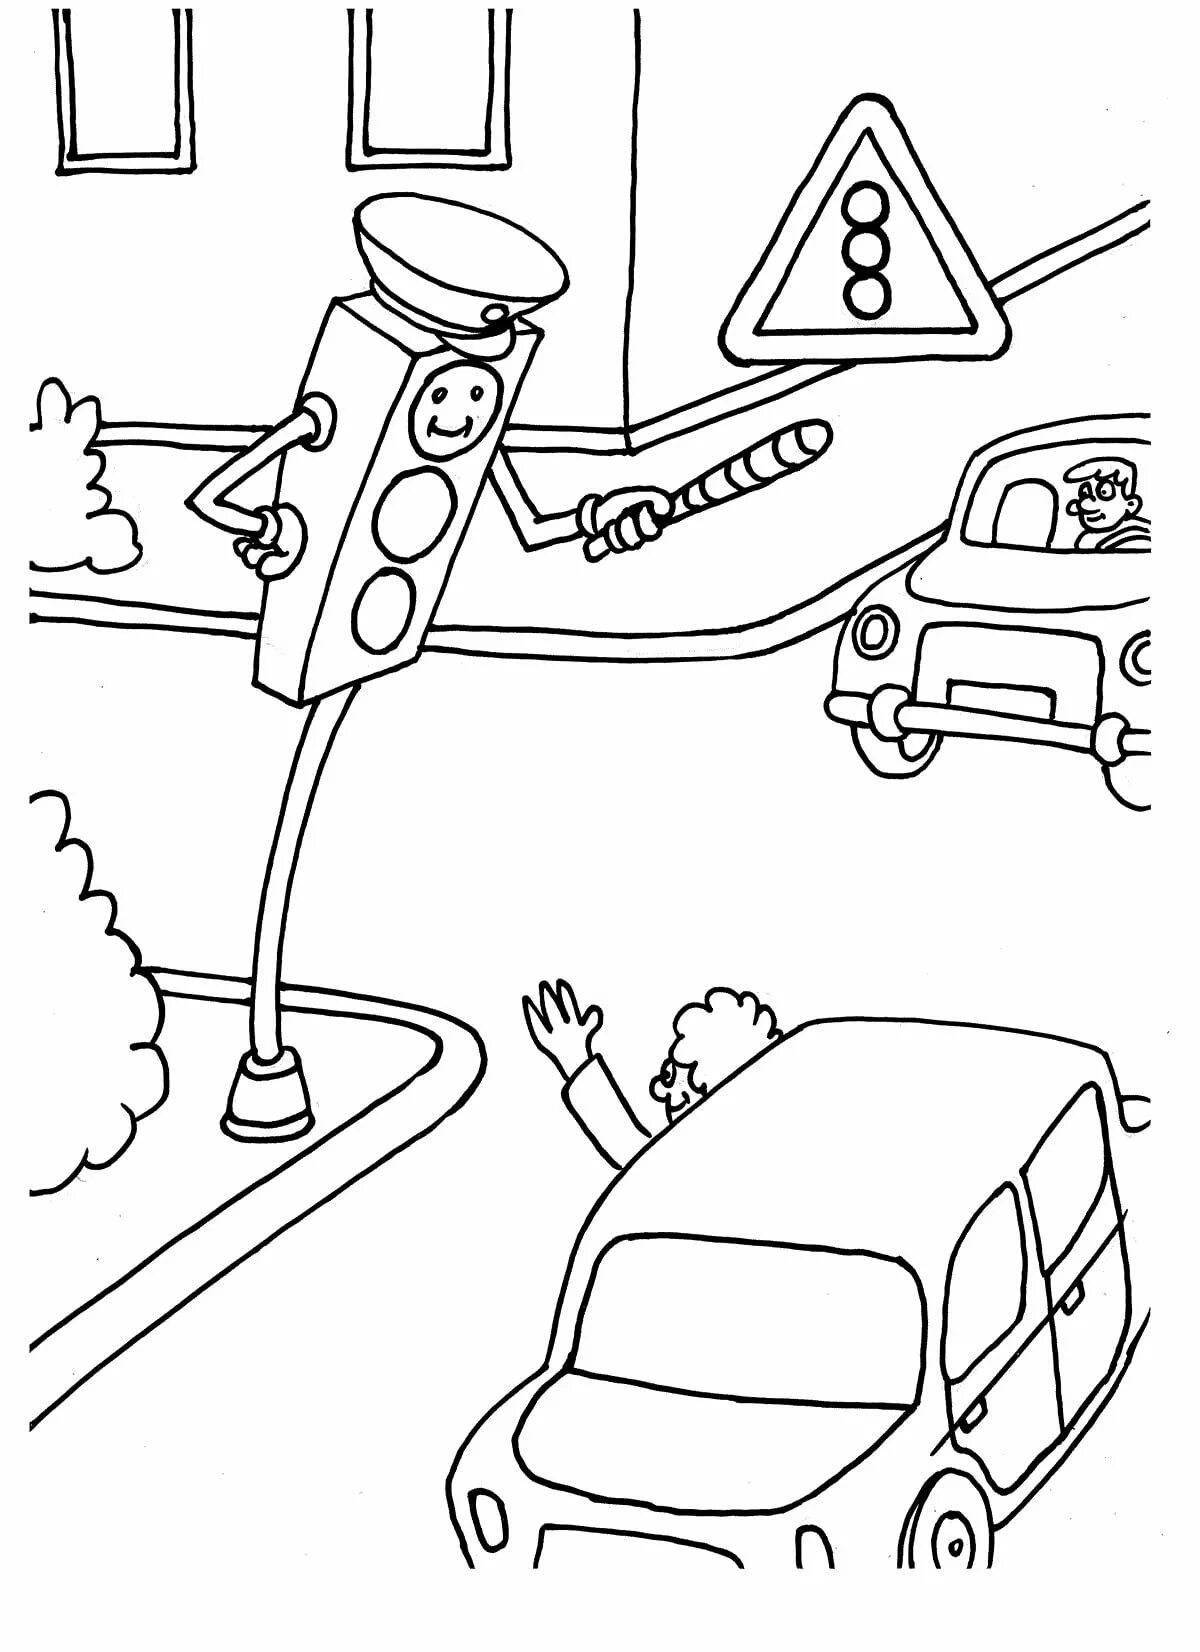 Fun coloring pages for kids traffic rules